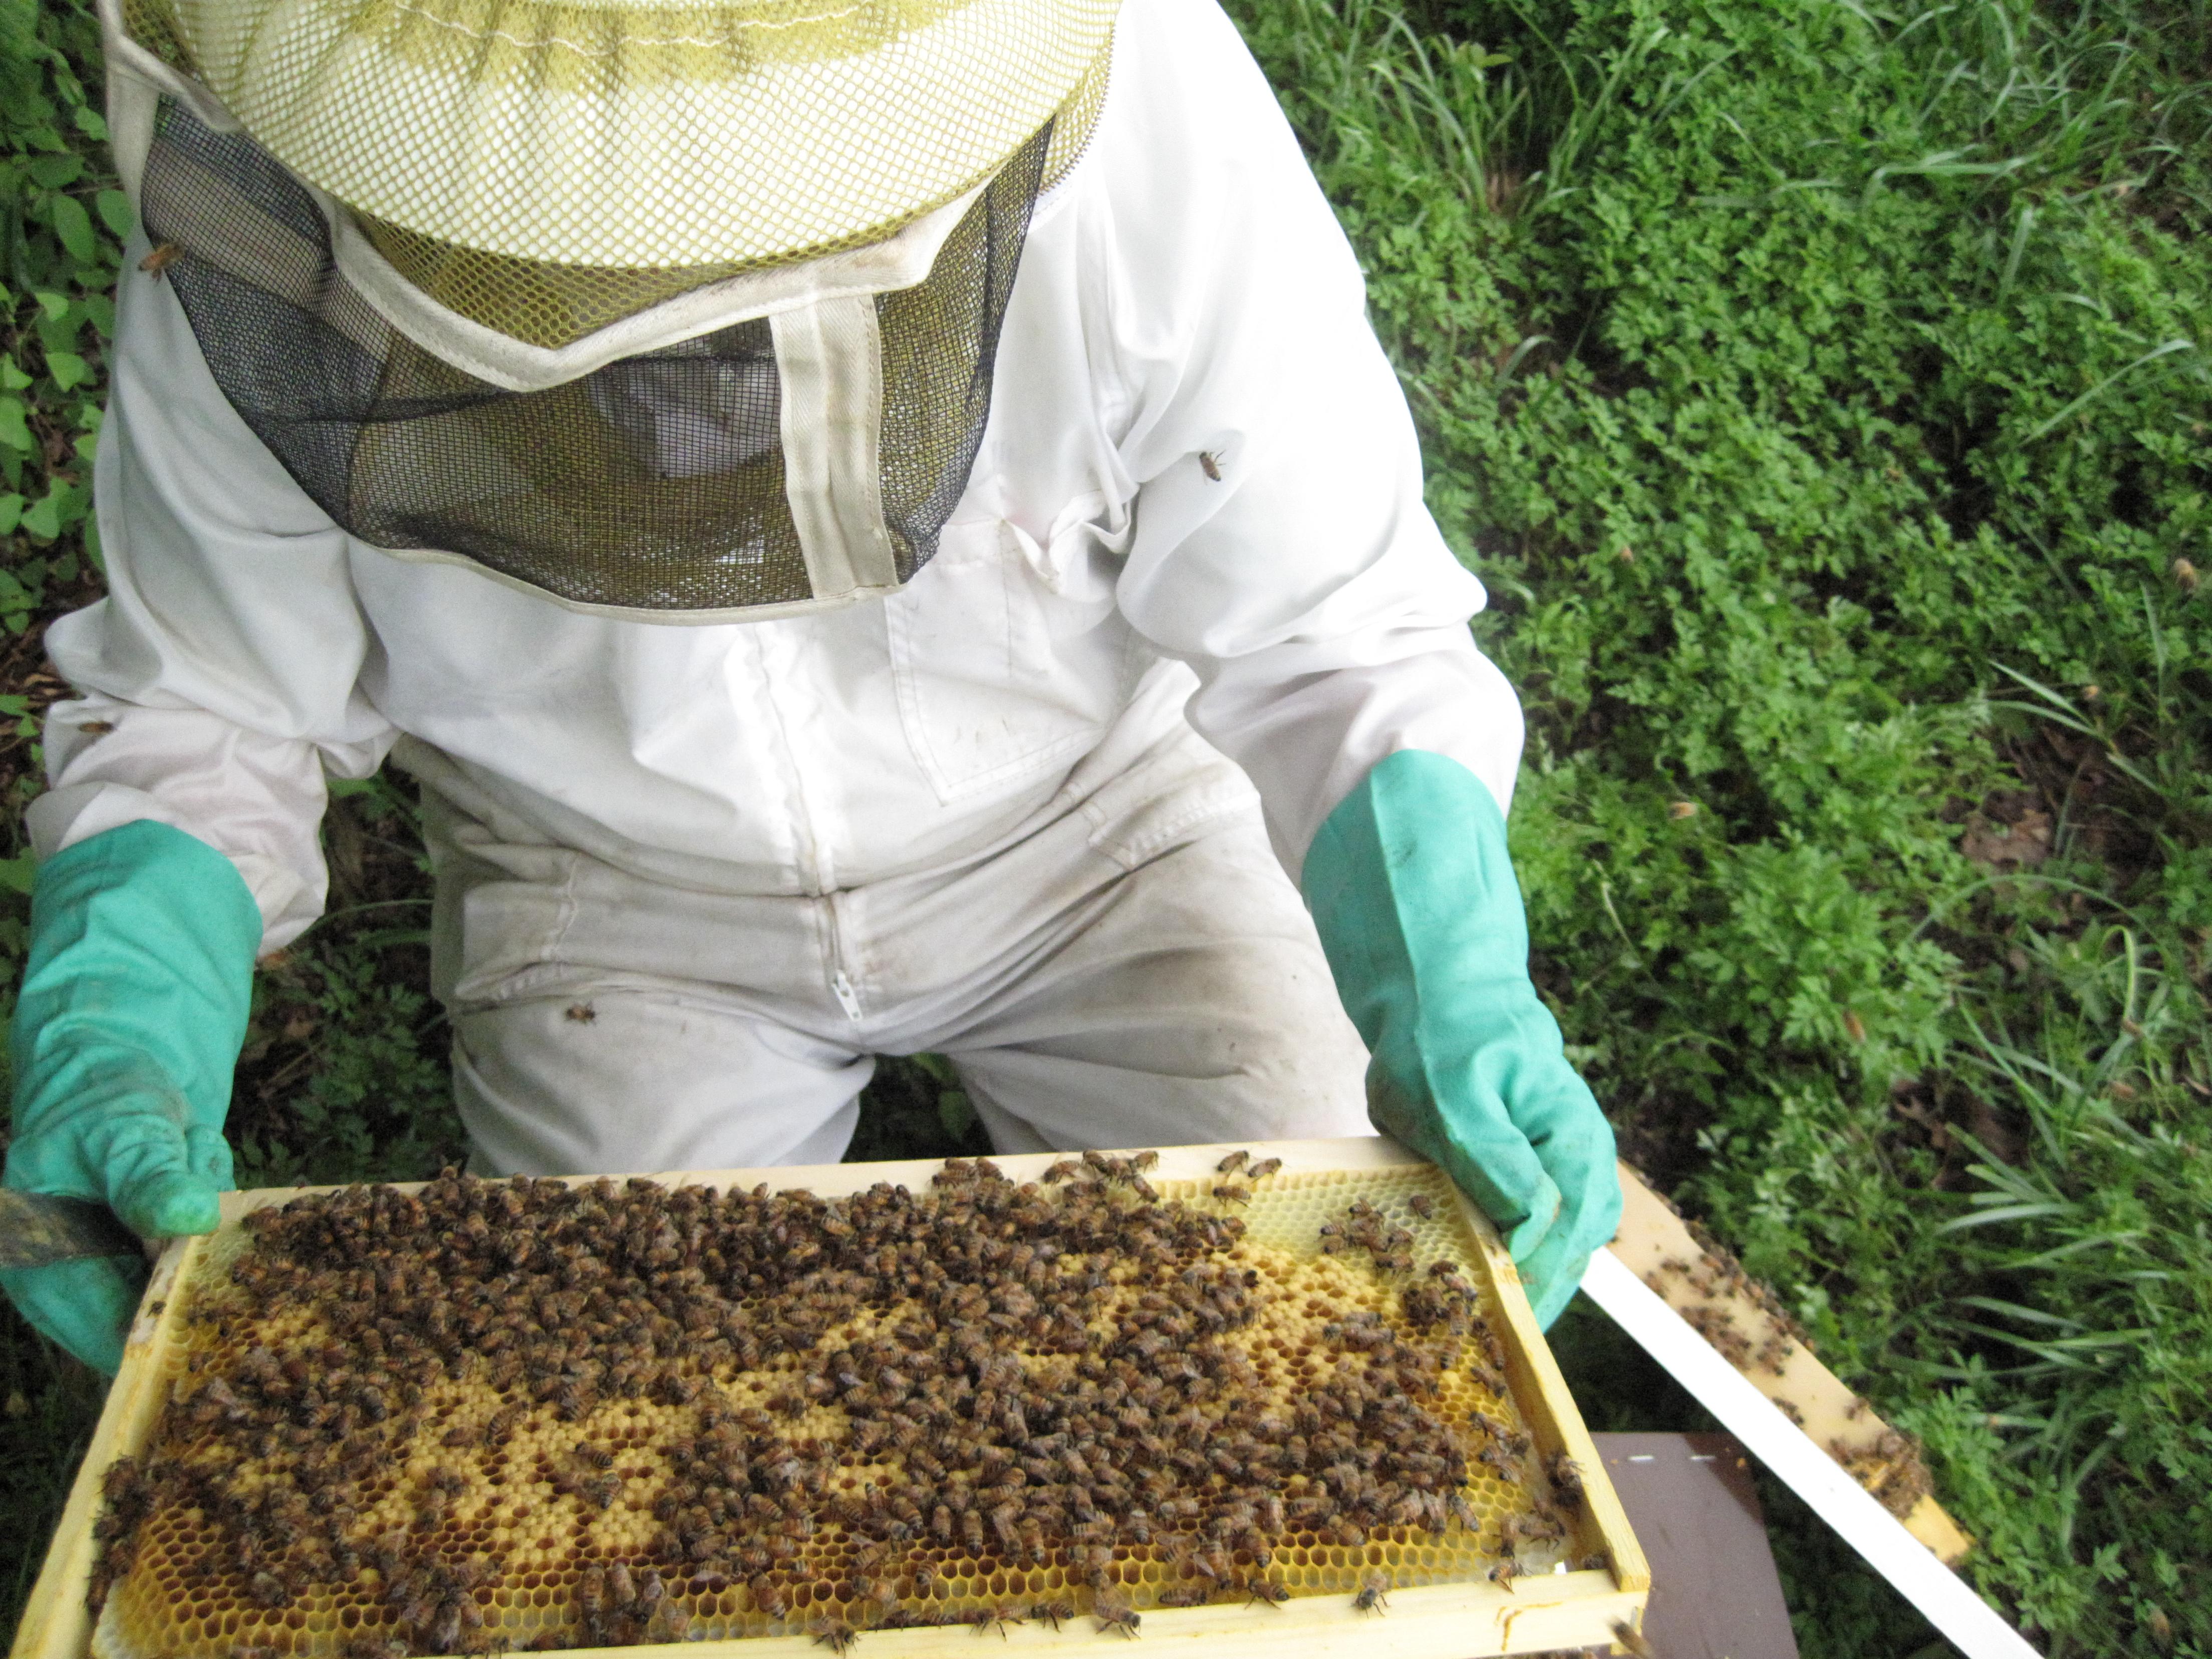 UMD researcher inspects bees